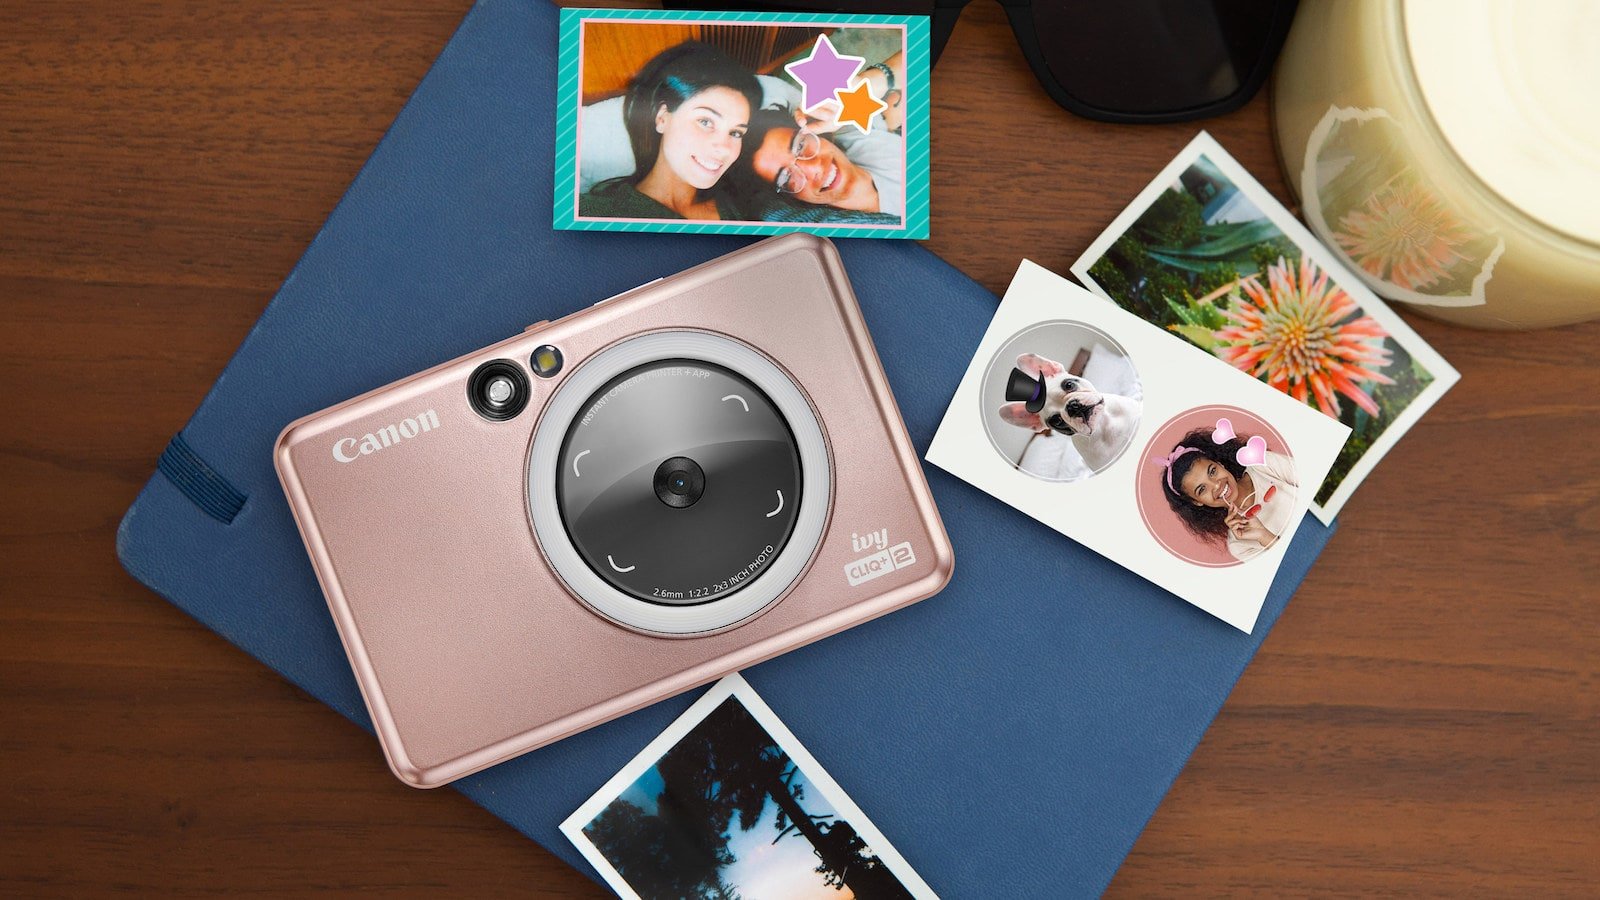 Canon IVY CLIQ+2 instant camera features a Large Selfie Mirror and 8 LED Ring Light